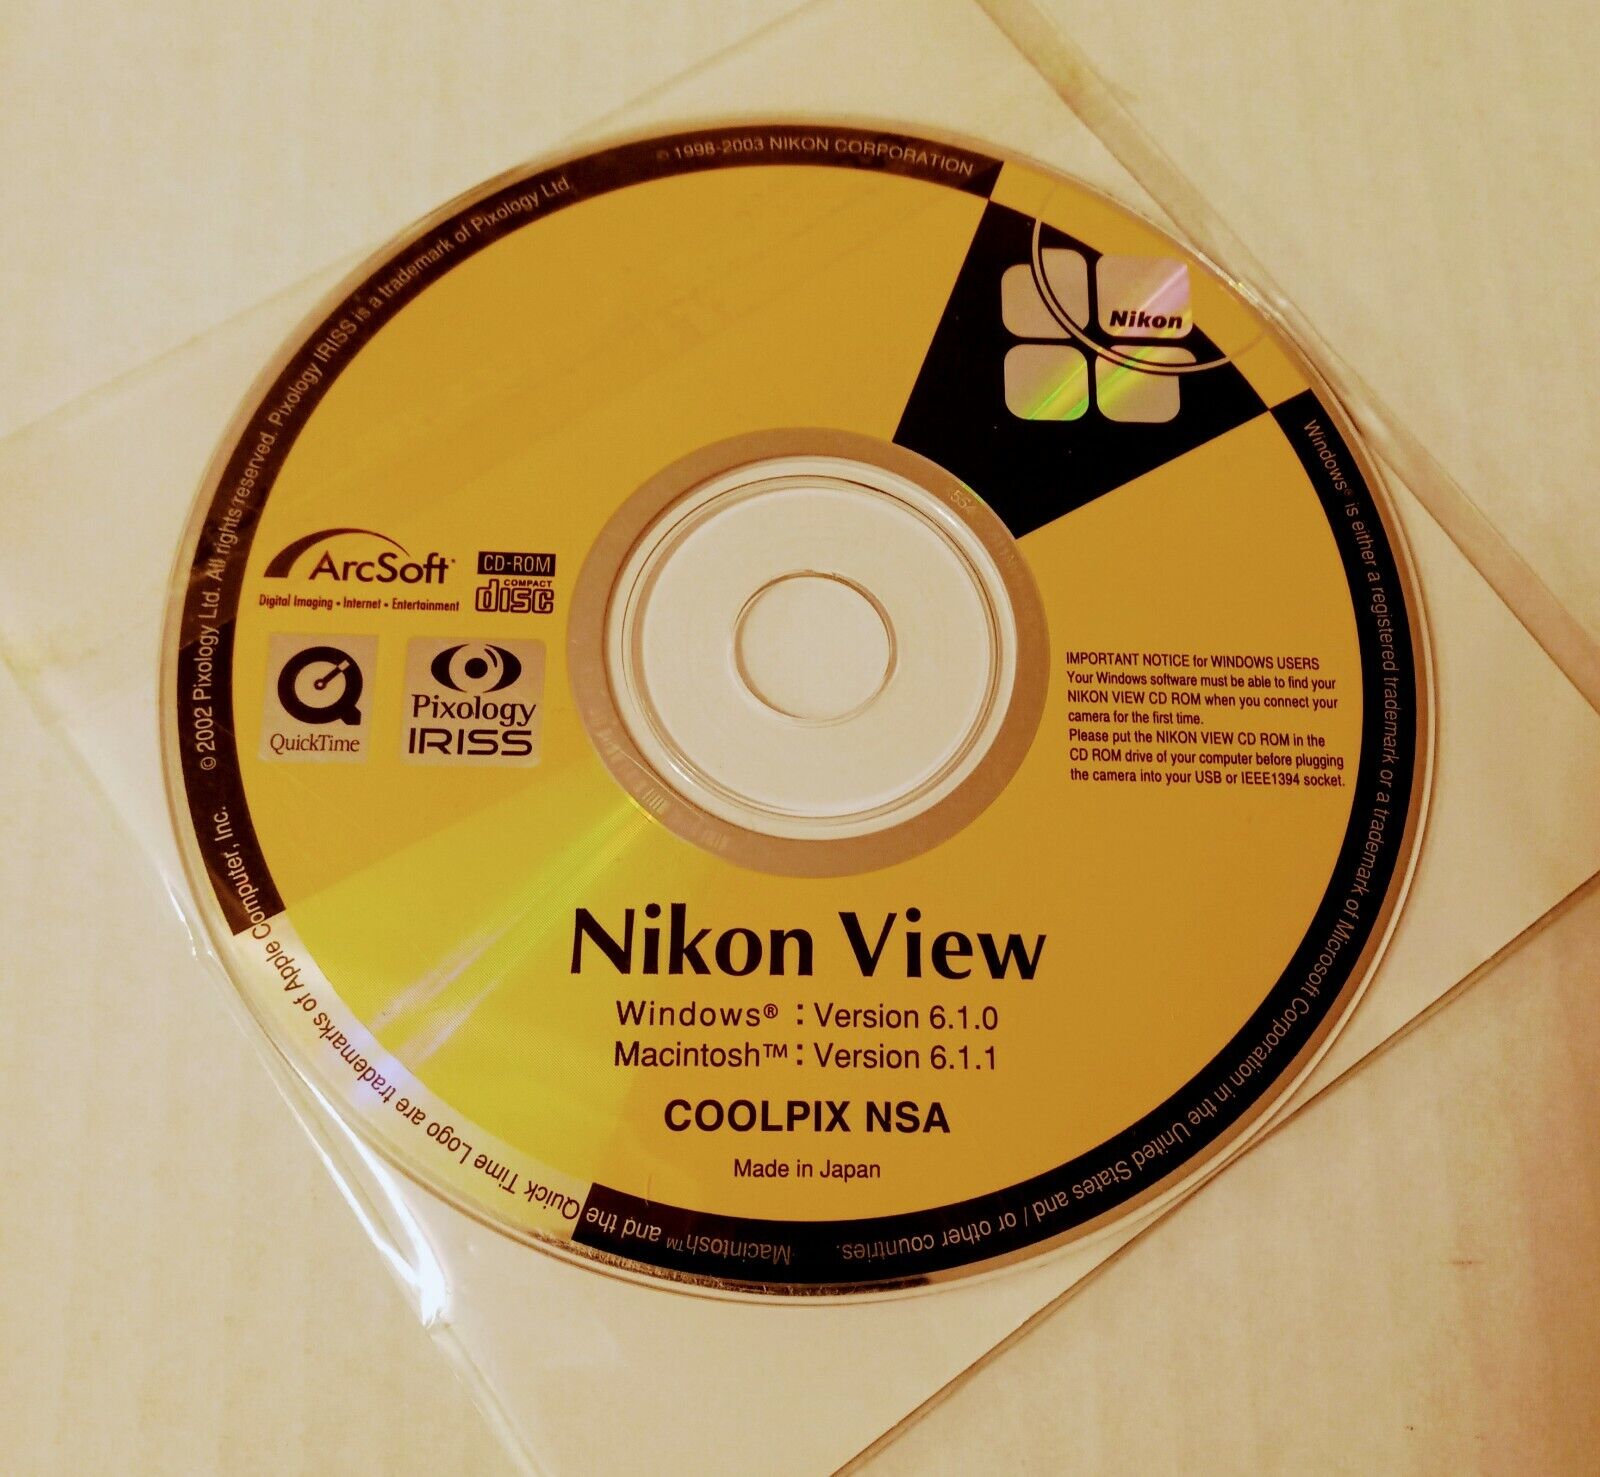 NIKON View 6 Software CD-Rom, Version 6.1 for Mac or Windows, Coolpix NSA 2003